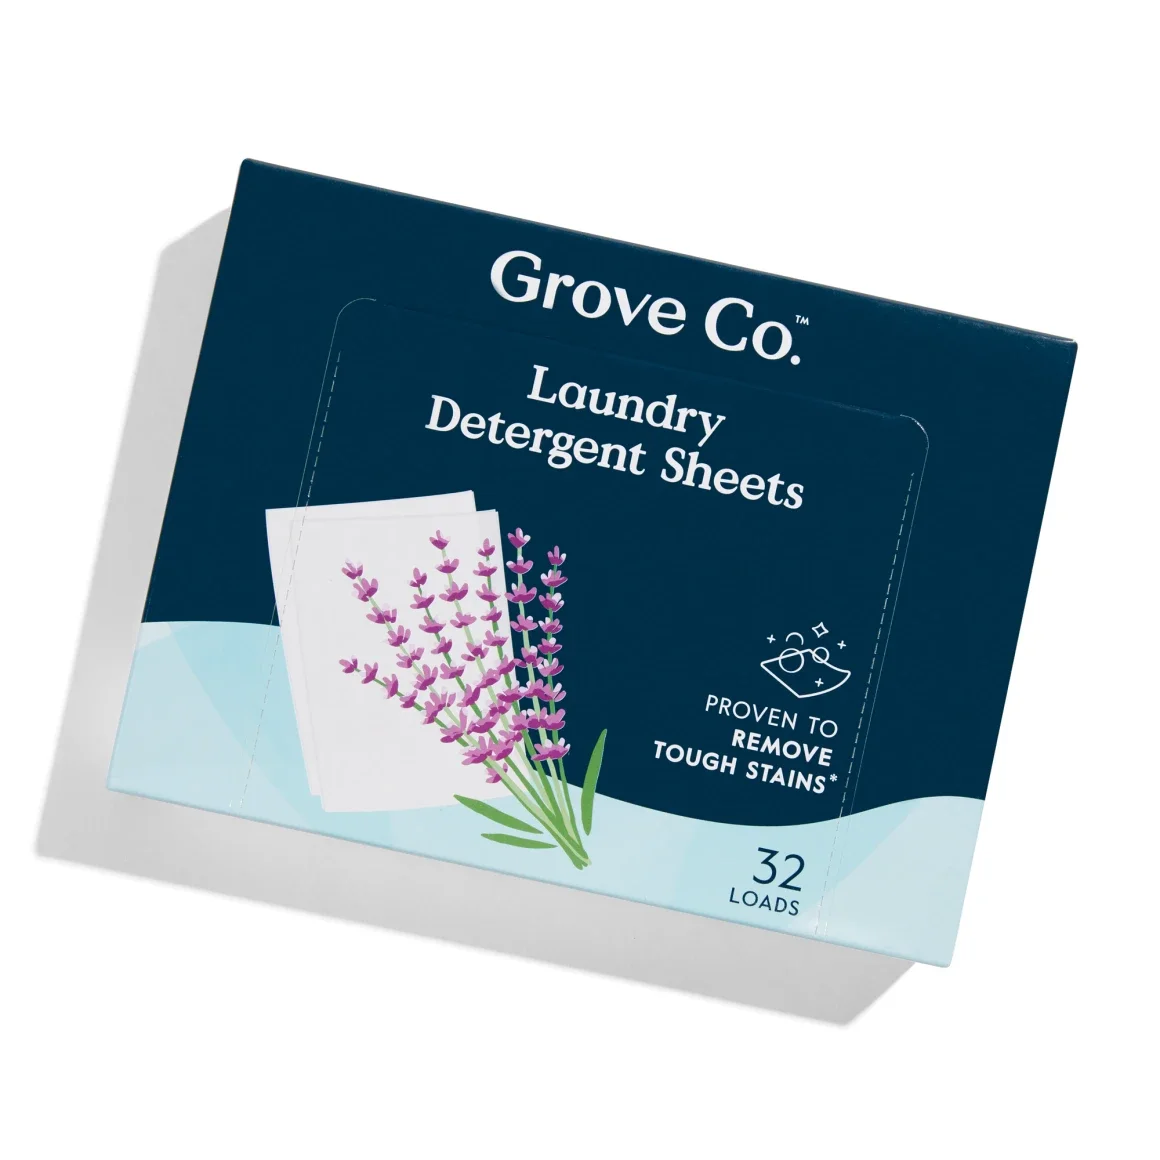 Grove Co laundry detergent sheets